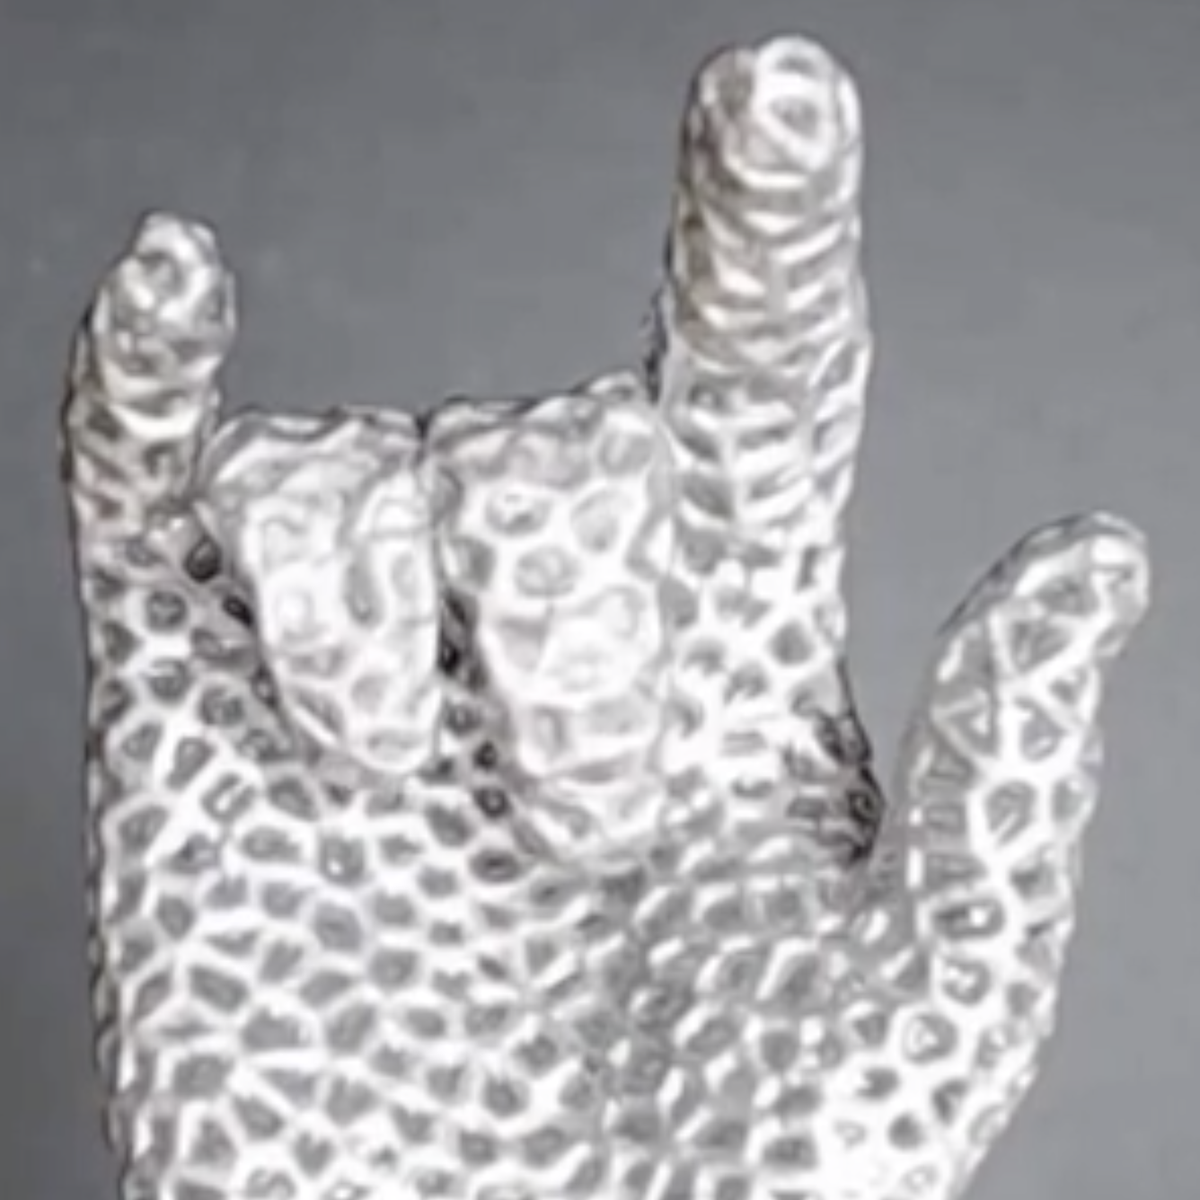 a hand made of white "lattice" material, formed into the "rock 'n' roll" hand position